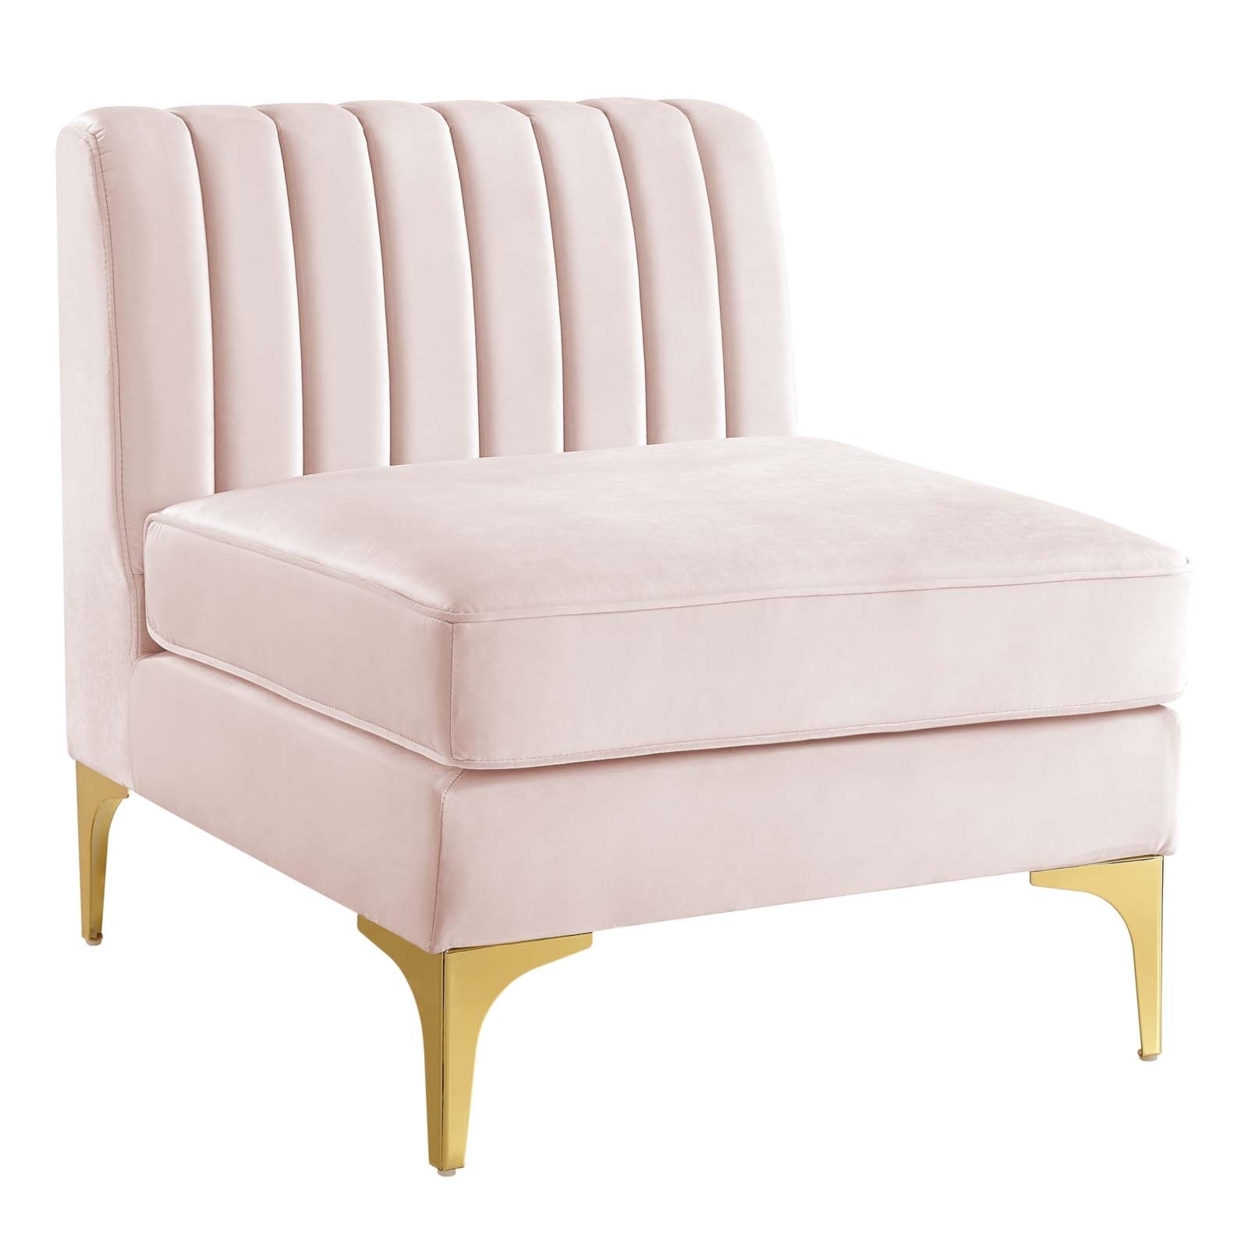 Triumph Channel Tufted Performance Velvet Armless Chair, Pink